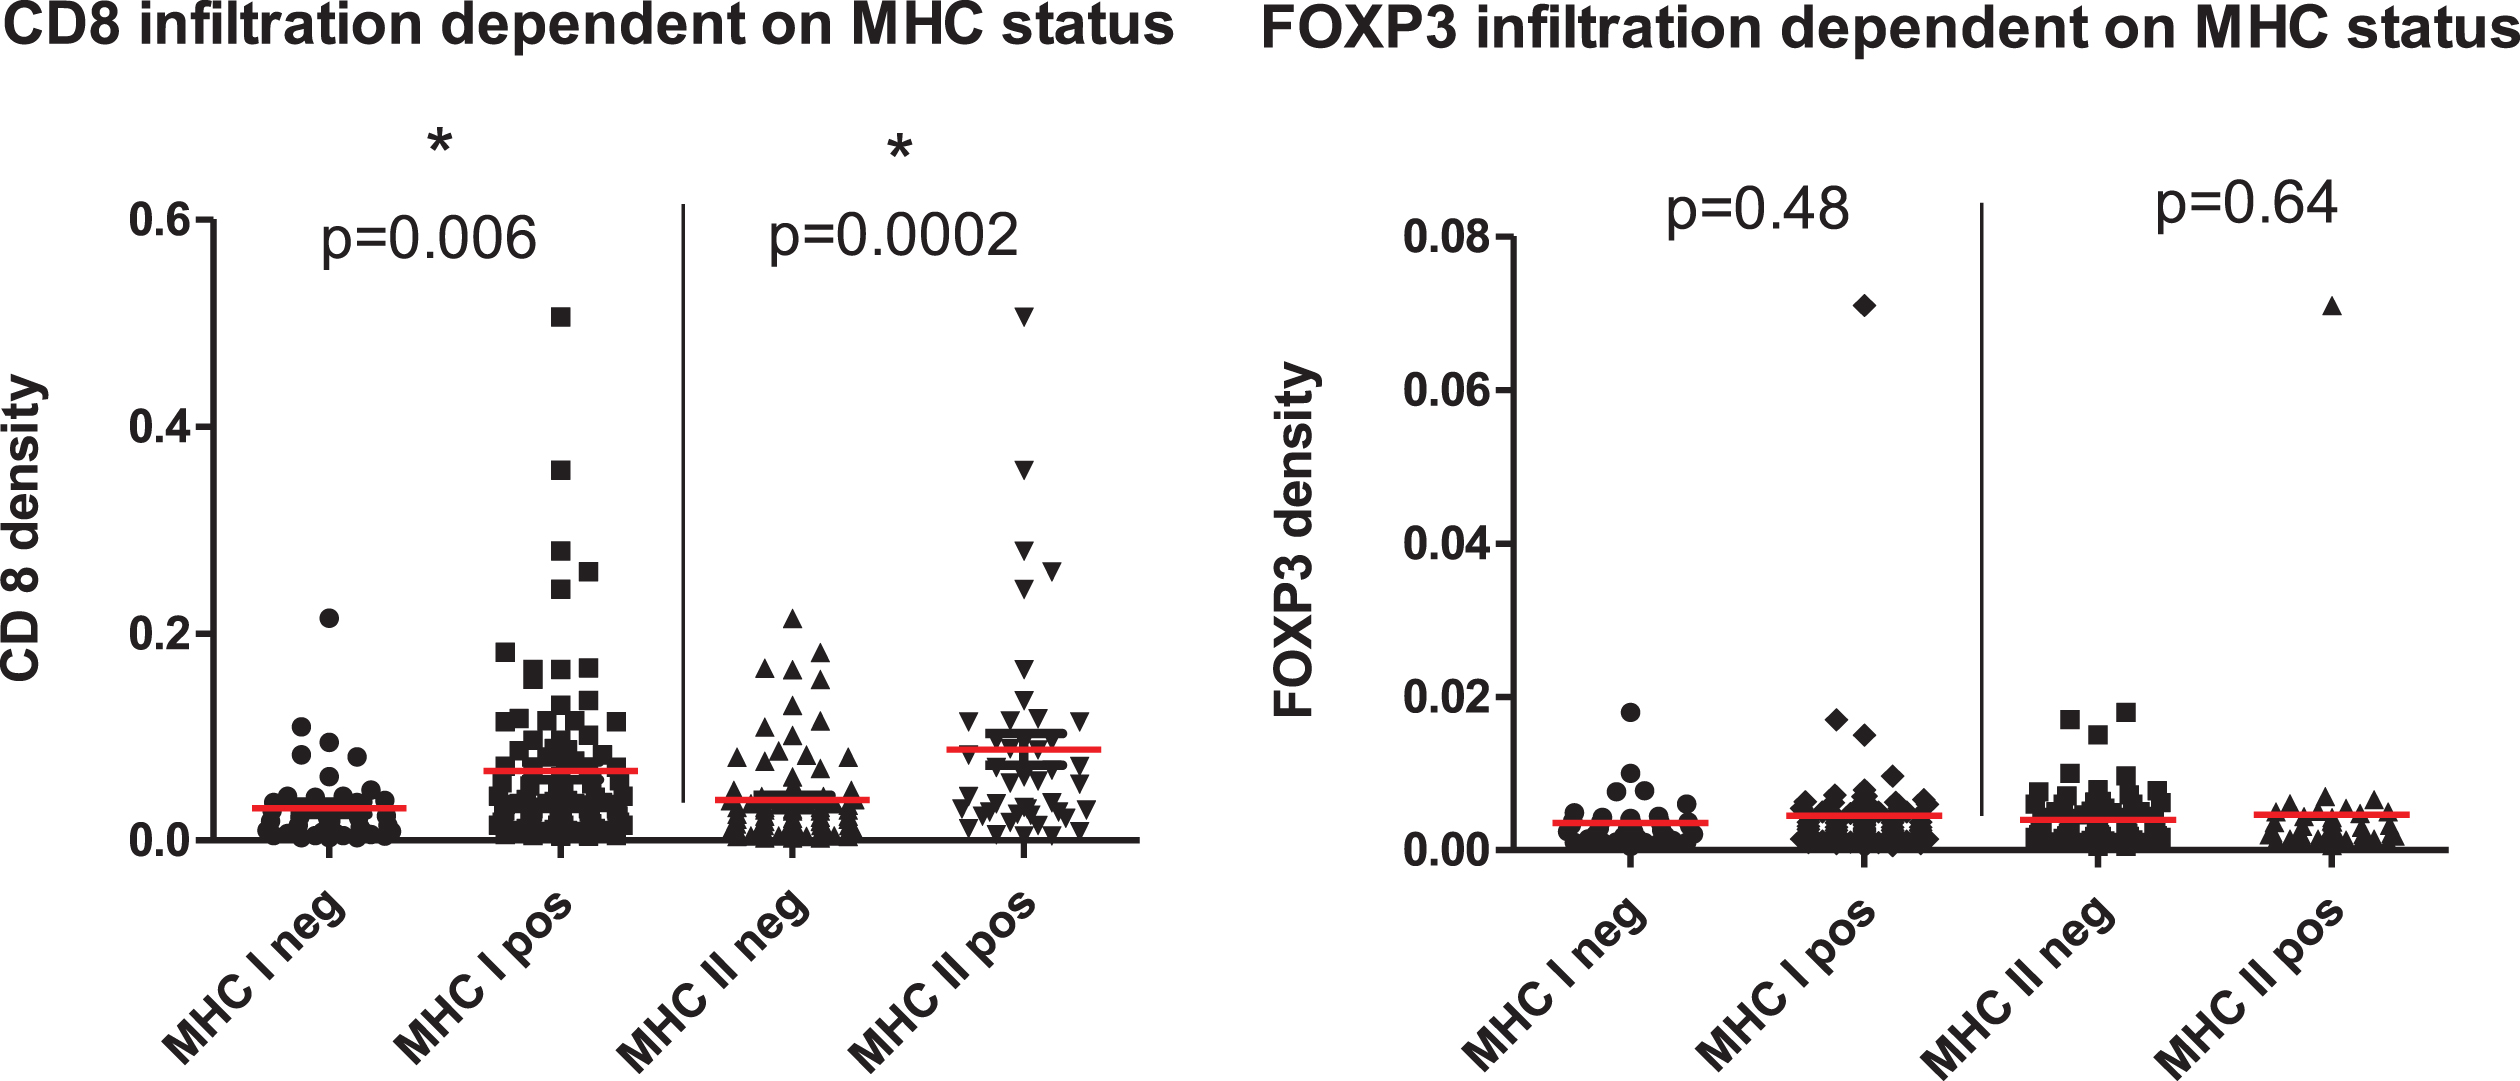 Infiltration density with CD8+ T effector cells (upper image) and FOXP3+ regulatory T cells (lower image) dependent on MHC expression. 149 patients from cohort 1 were grouped according to their MHC status and the density of infiltrating immune cells determined by IHC. A significantly higher infiltration density in MHC + patients was found.